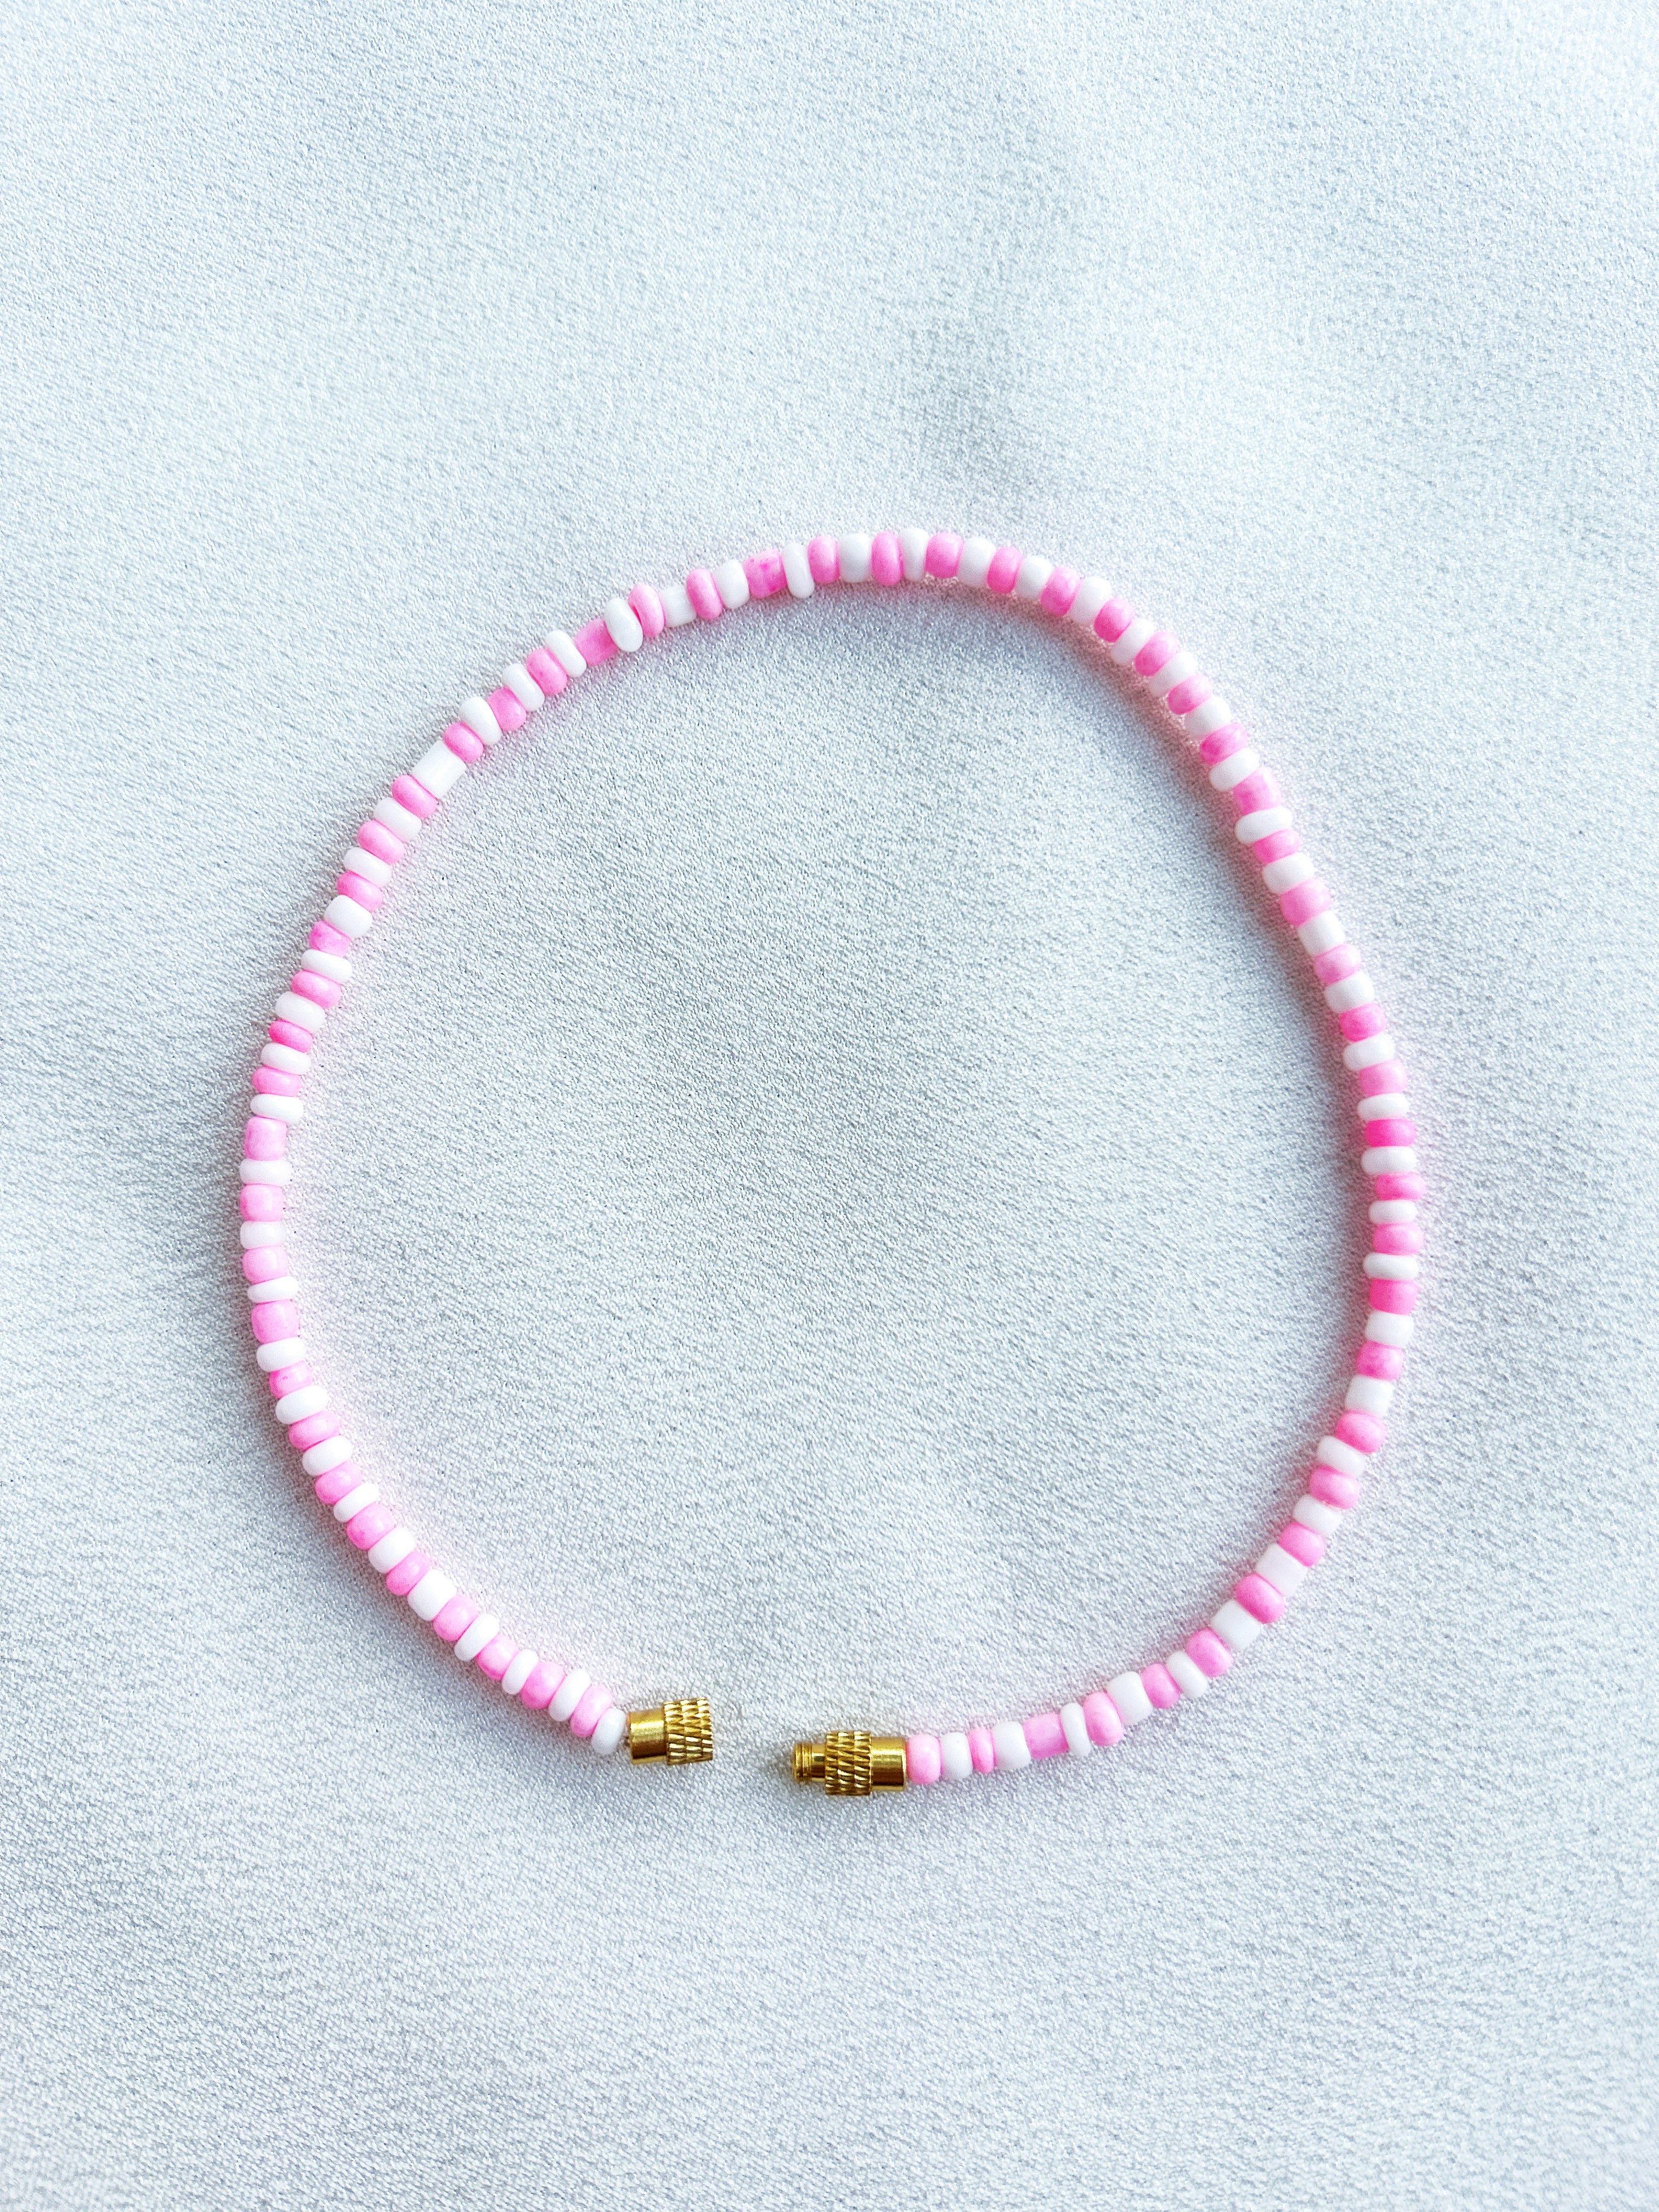 [THE TWO] Anklet/Bracelet: White/Pink [Small Beads]